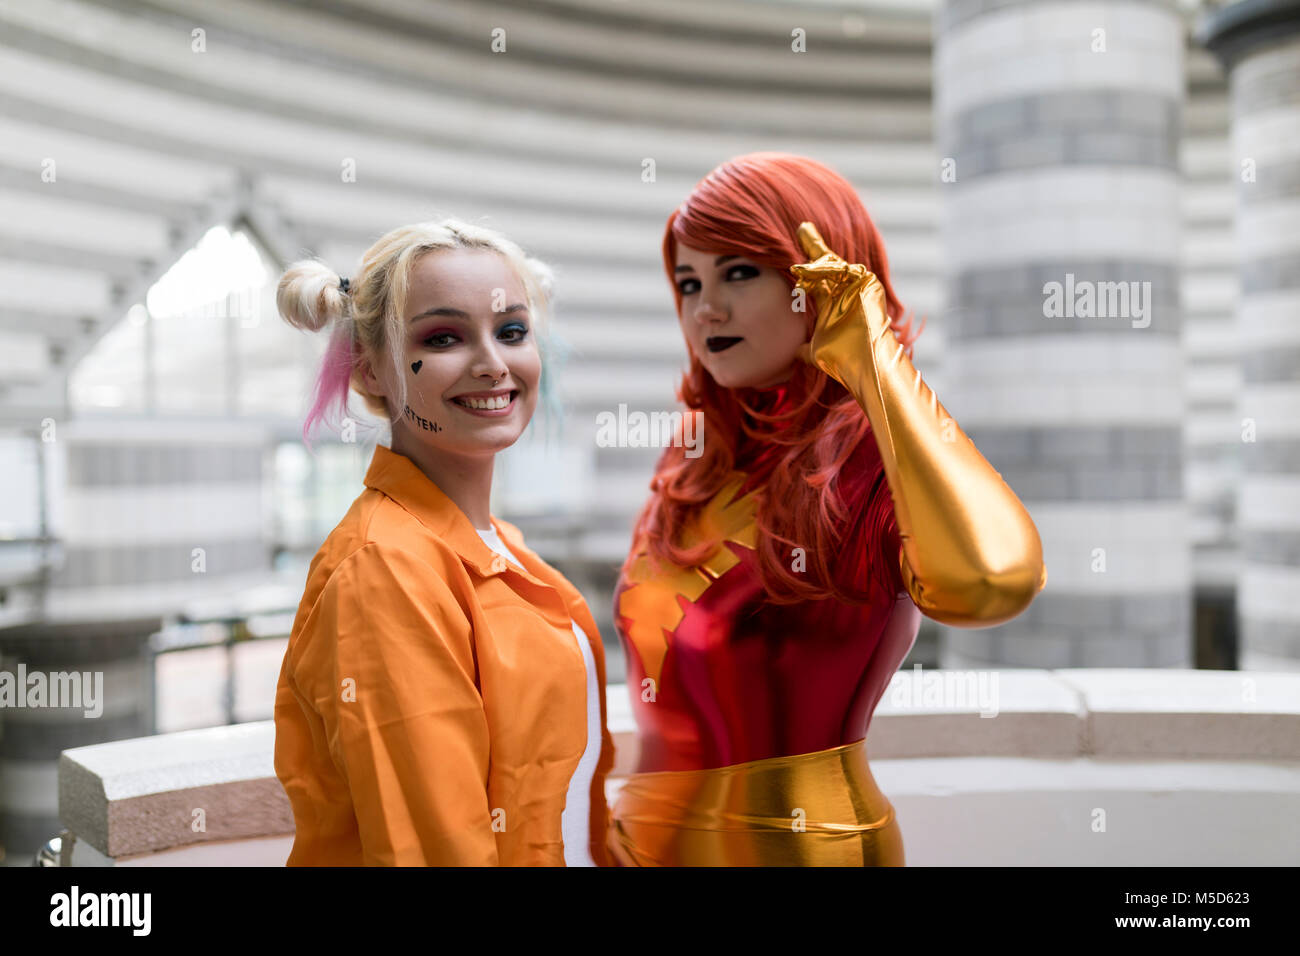 Doncaster Comic Con 11th Feruary 2018 at The Doncaster Dome. Two young women cosplay as Harley Quinn from Suicidé Squad and Marvel’s Jean Grey Phoenix Stock Photo